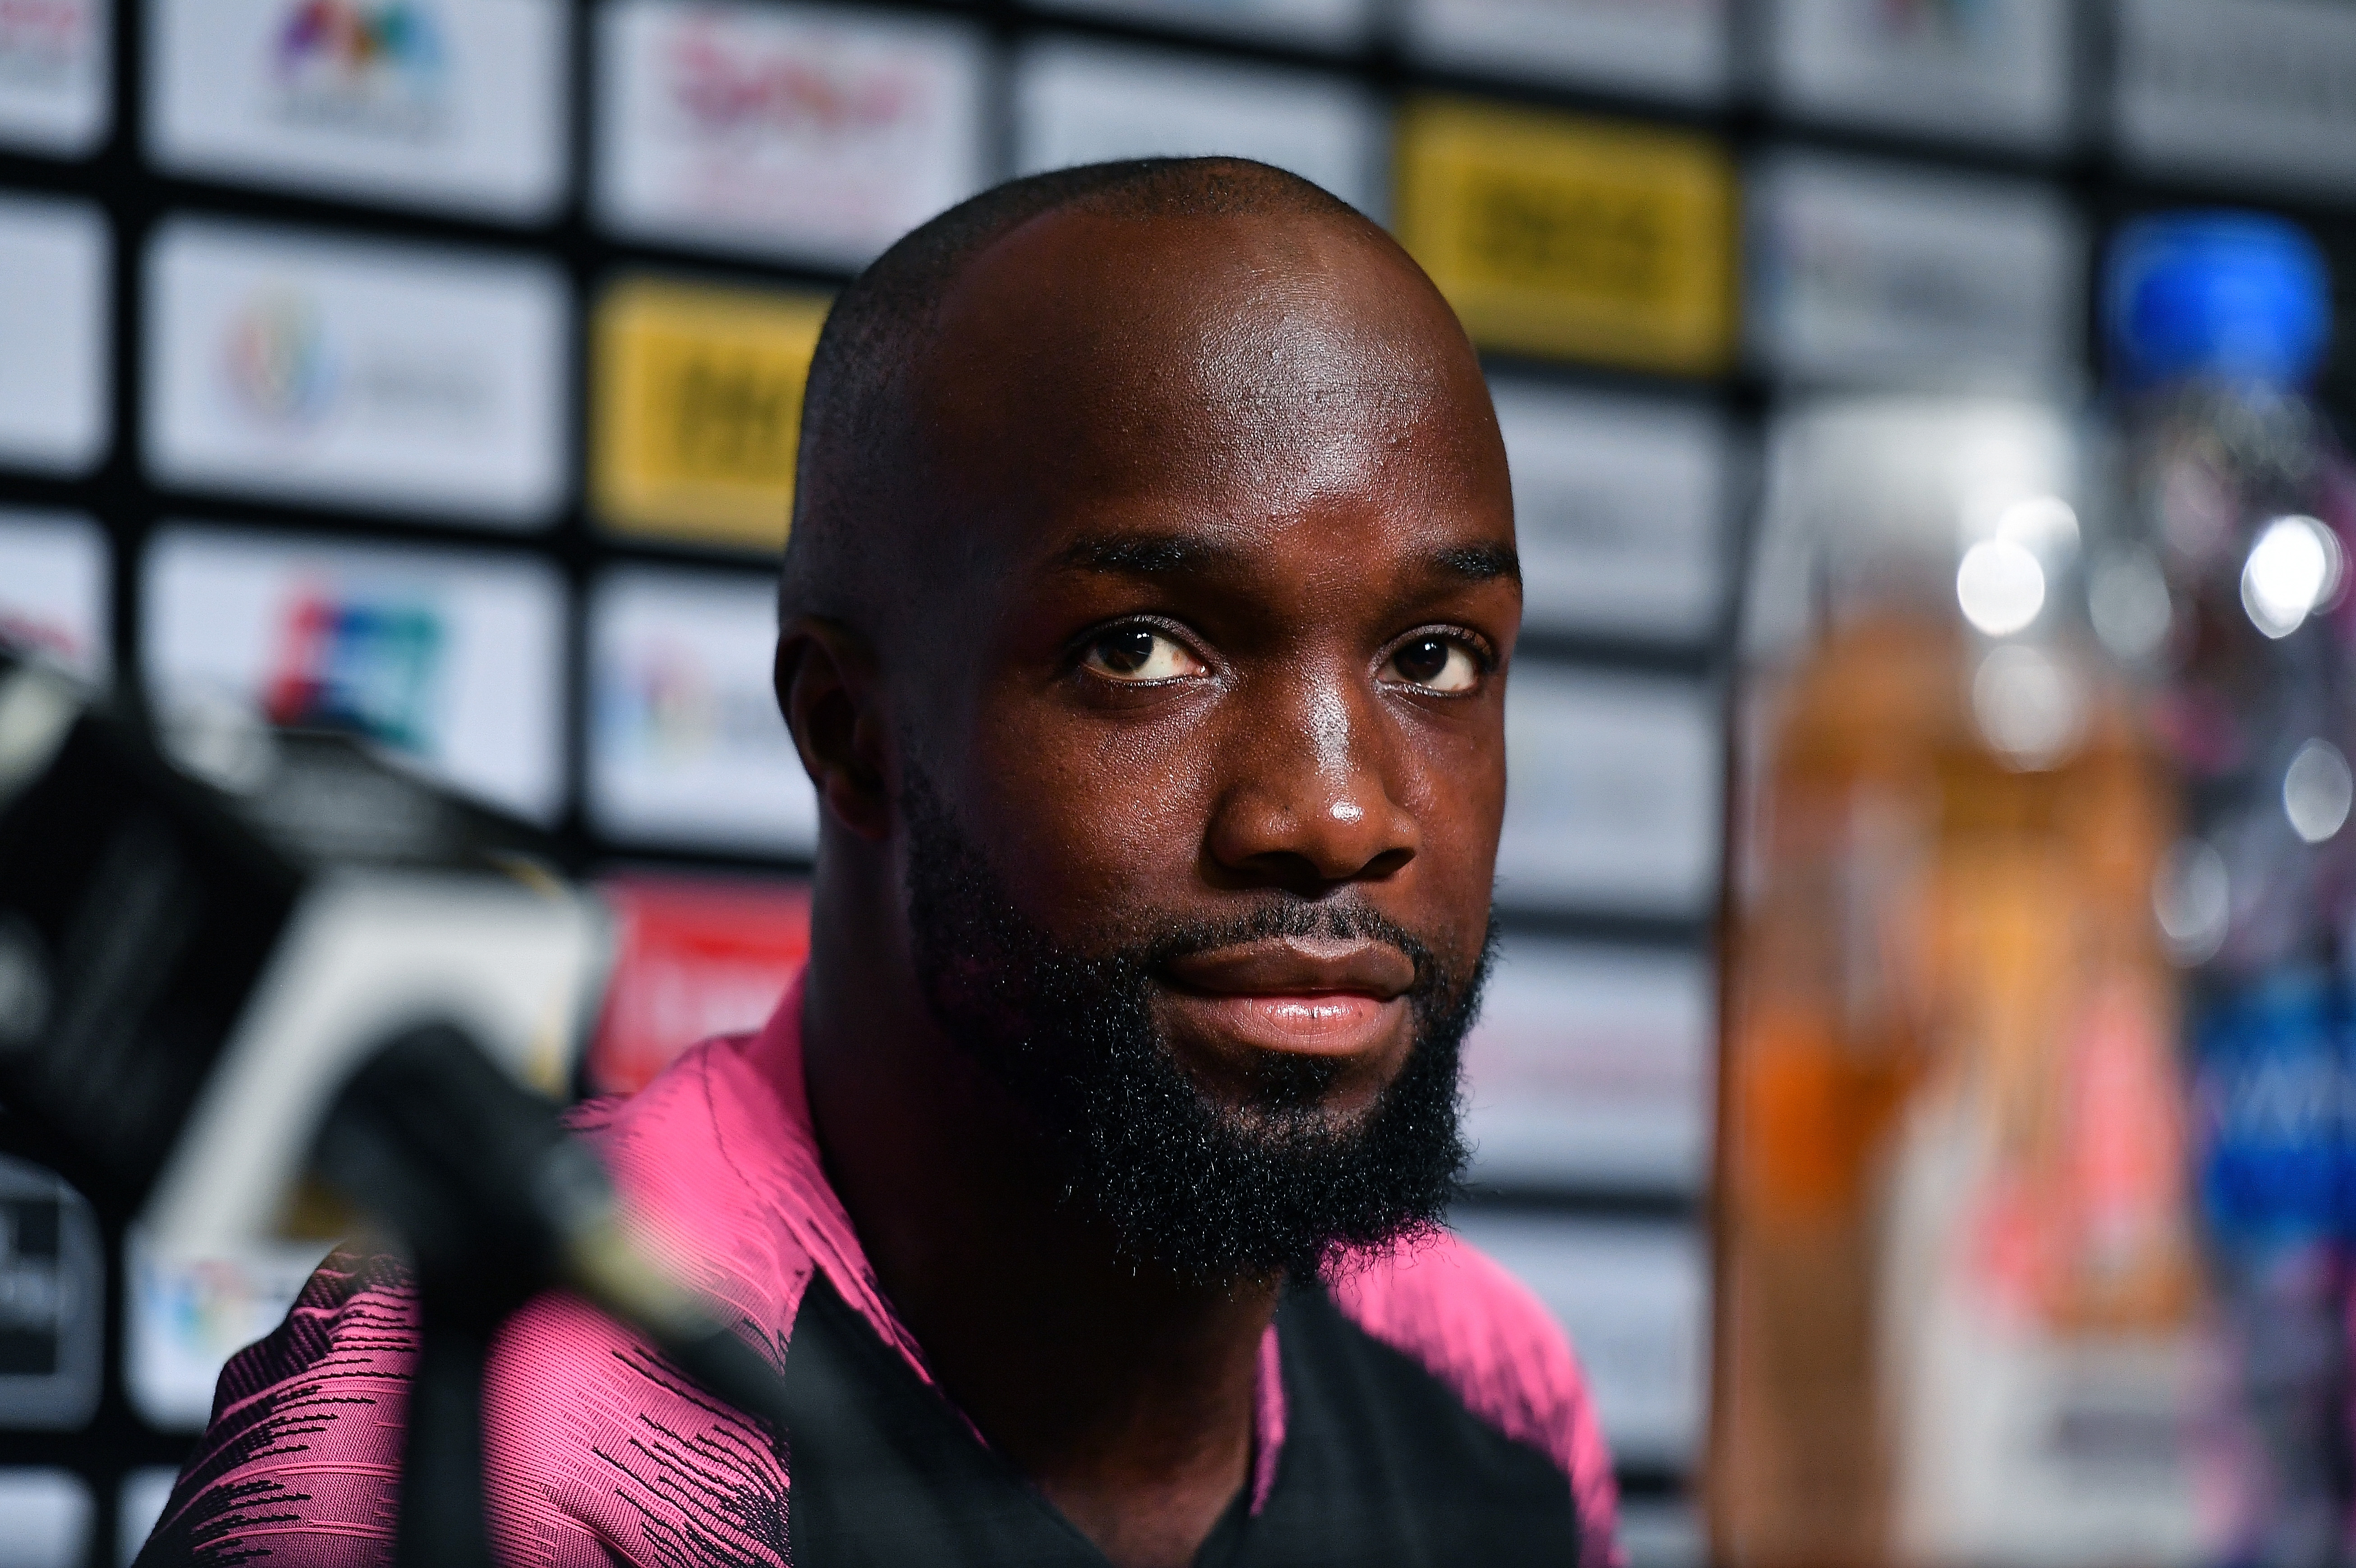 SINGAPORE - JULY 27: Lassana Diarra #19 of Paris Saint-Germain looks during pre match press conference ahead of the International Champions Cup 2018 match between Arsenal v Paris Saint Germain on July 27, 2018 in Singapore.  (Photo by Thananuwat Srirasant/Getty Images for ICC)